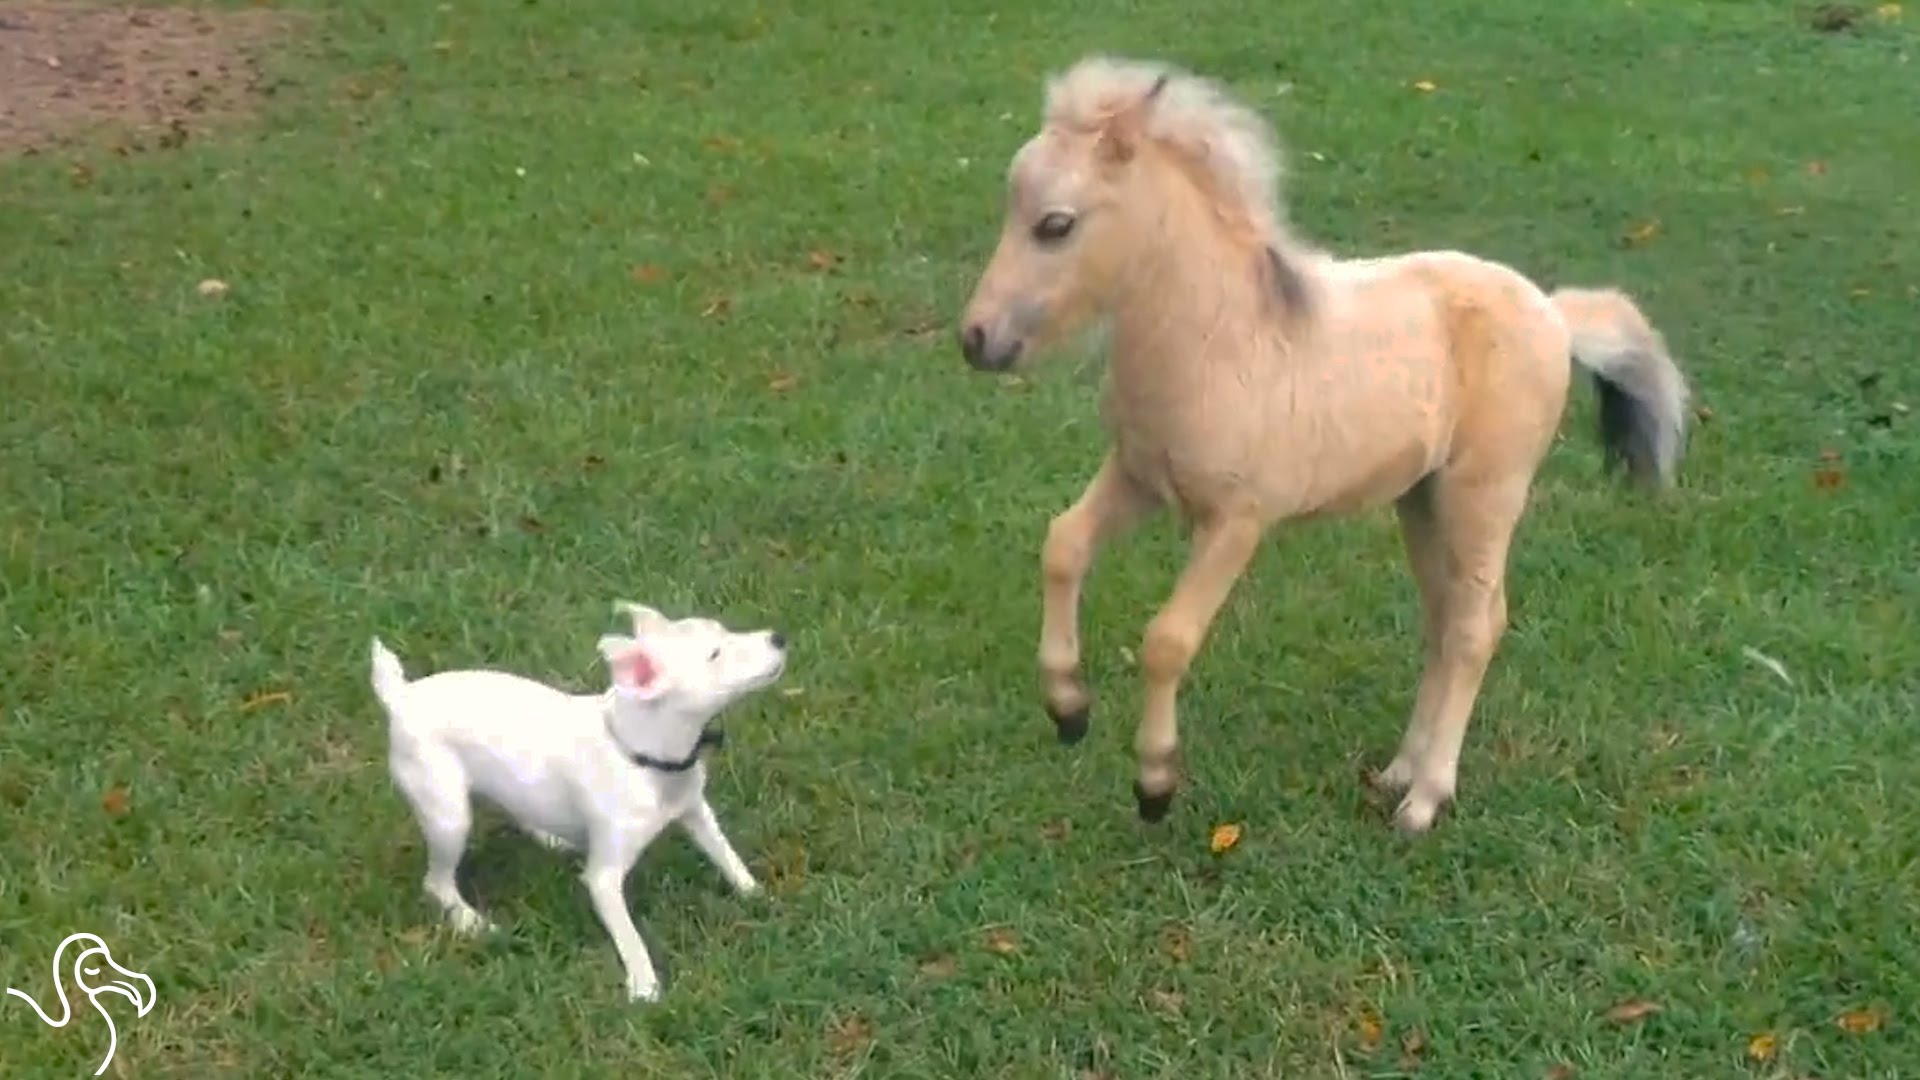 Baby Horse And Puppy Love To Play The Exact Same Games - YouTube